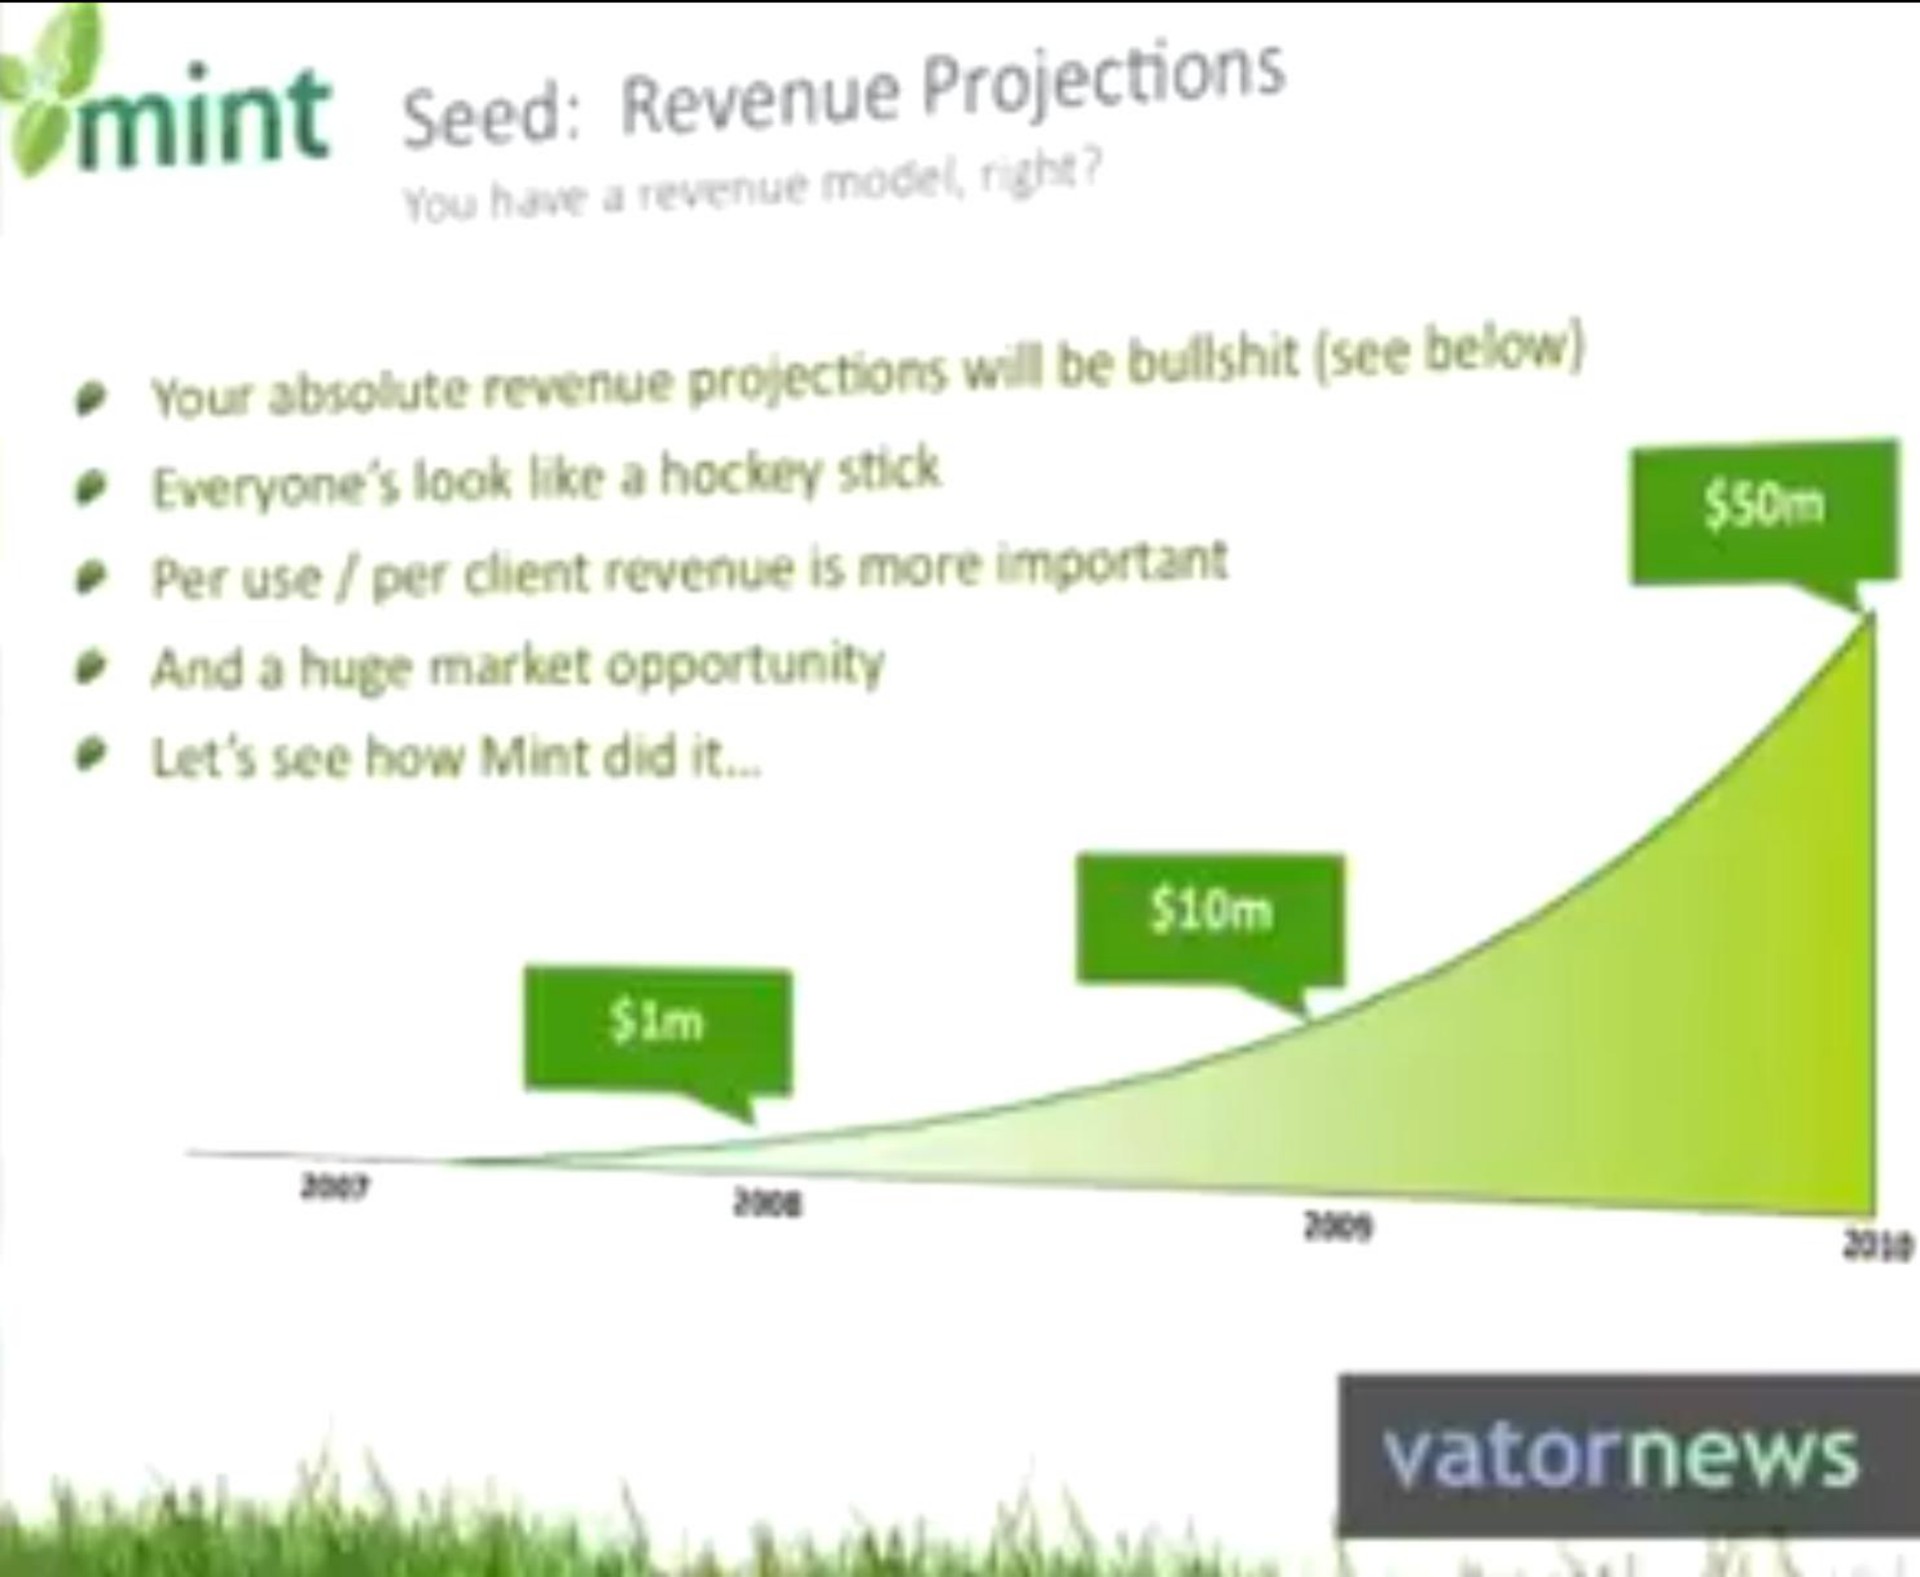 your revenue will be see below and a huge market opportunity let see how mint did it | Mint